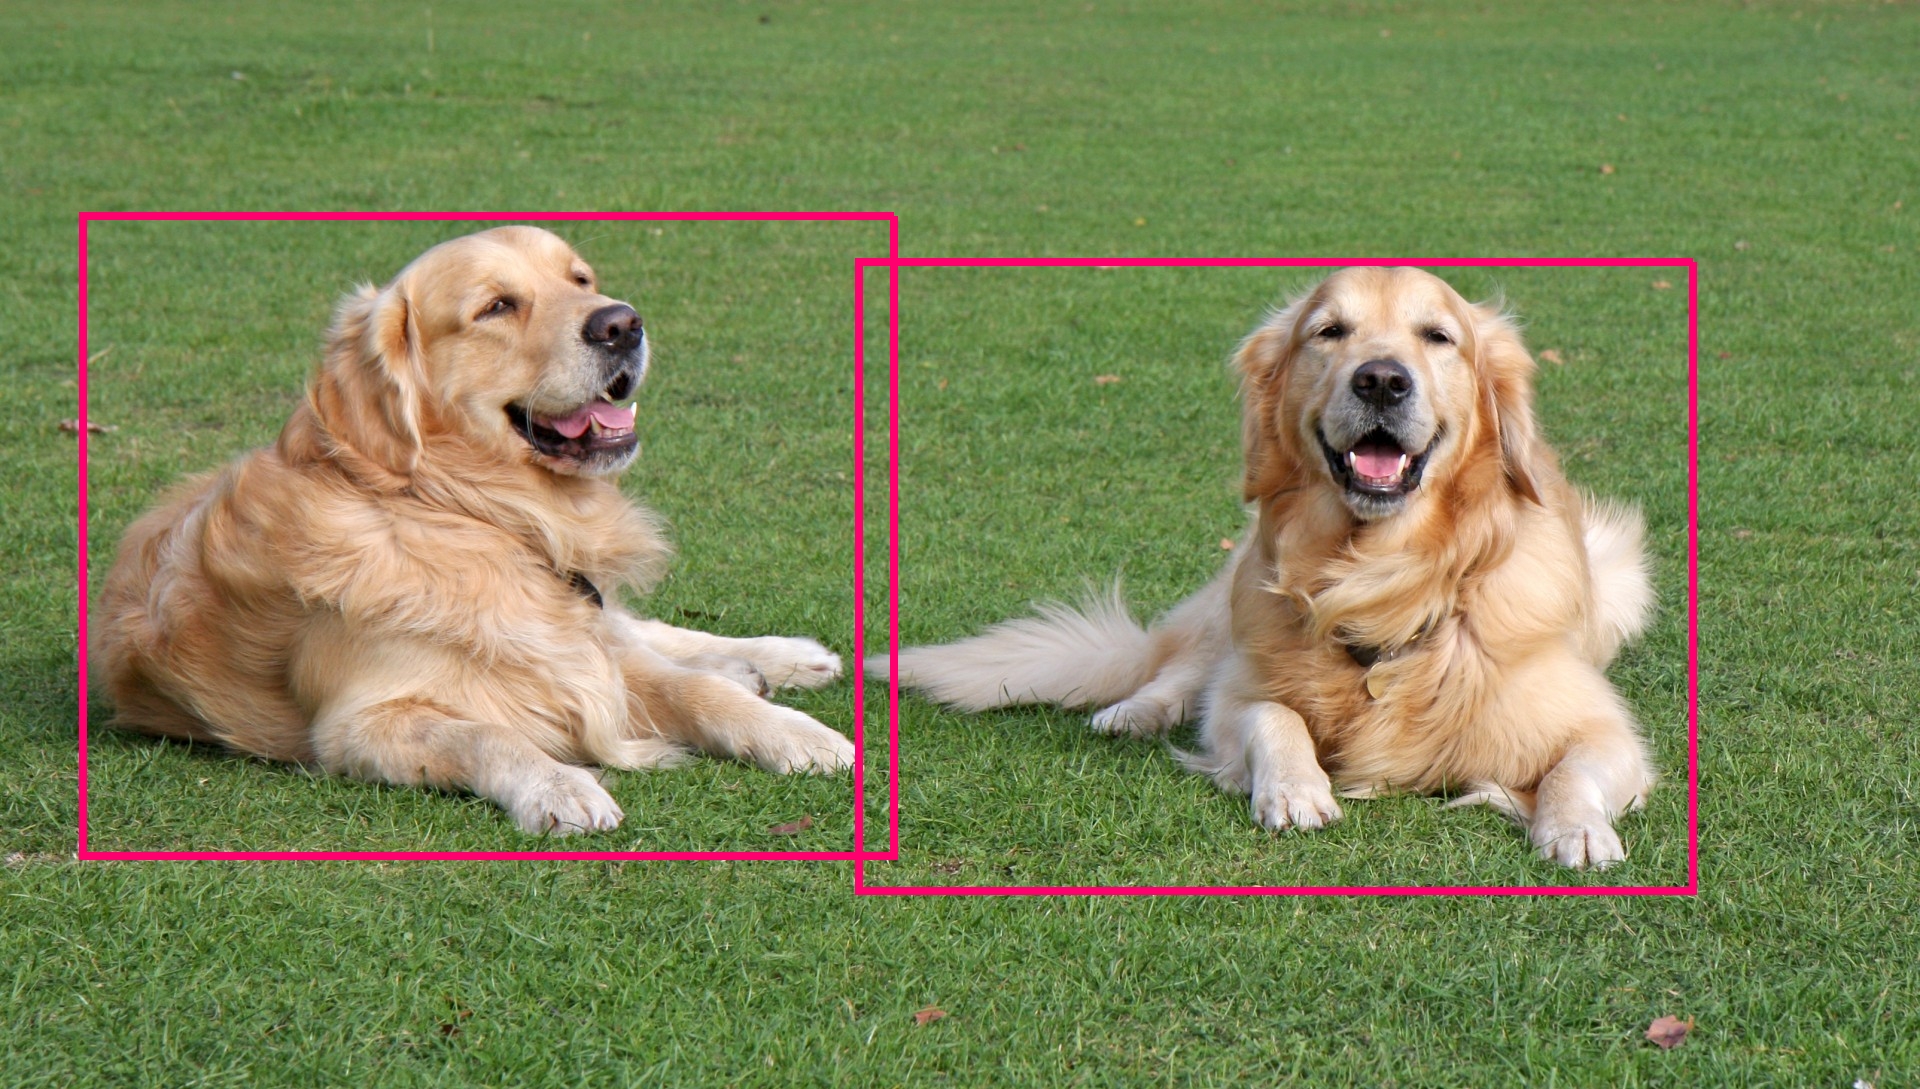 object-recognition-dogs